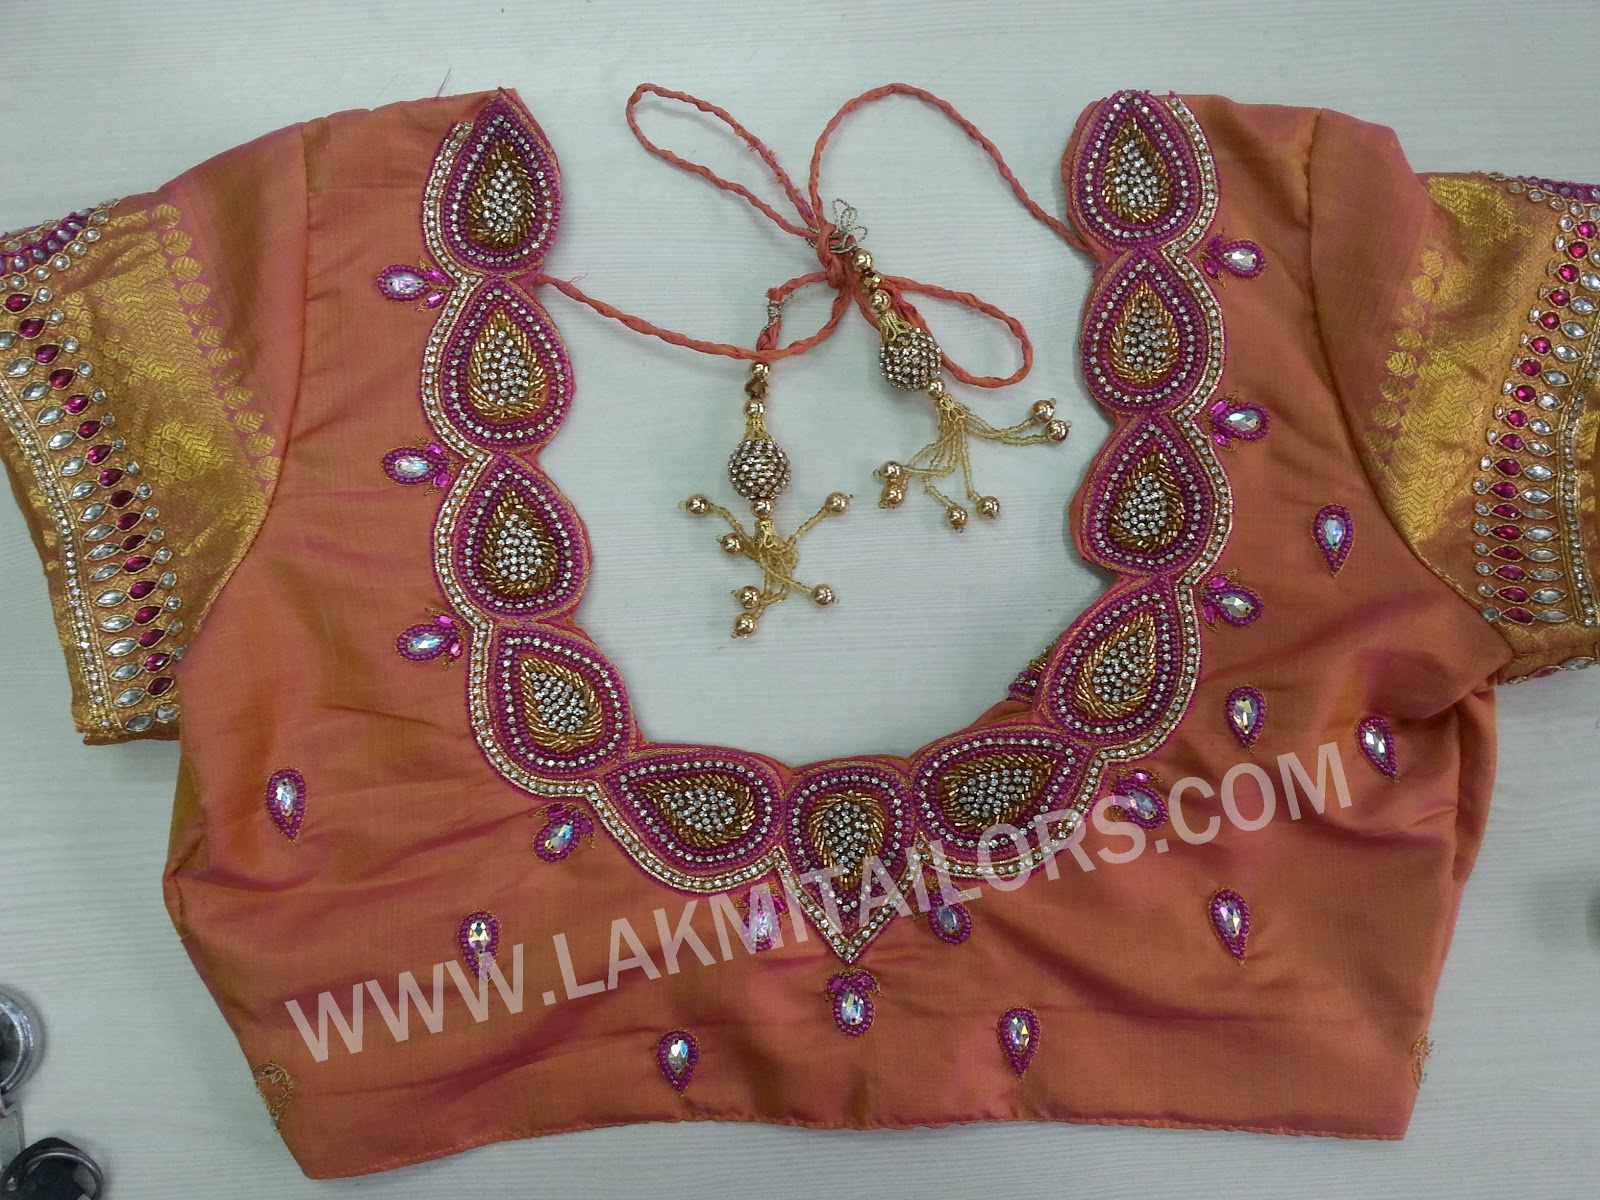 Wedding blouse hand embroidery designs from lakmi tailors